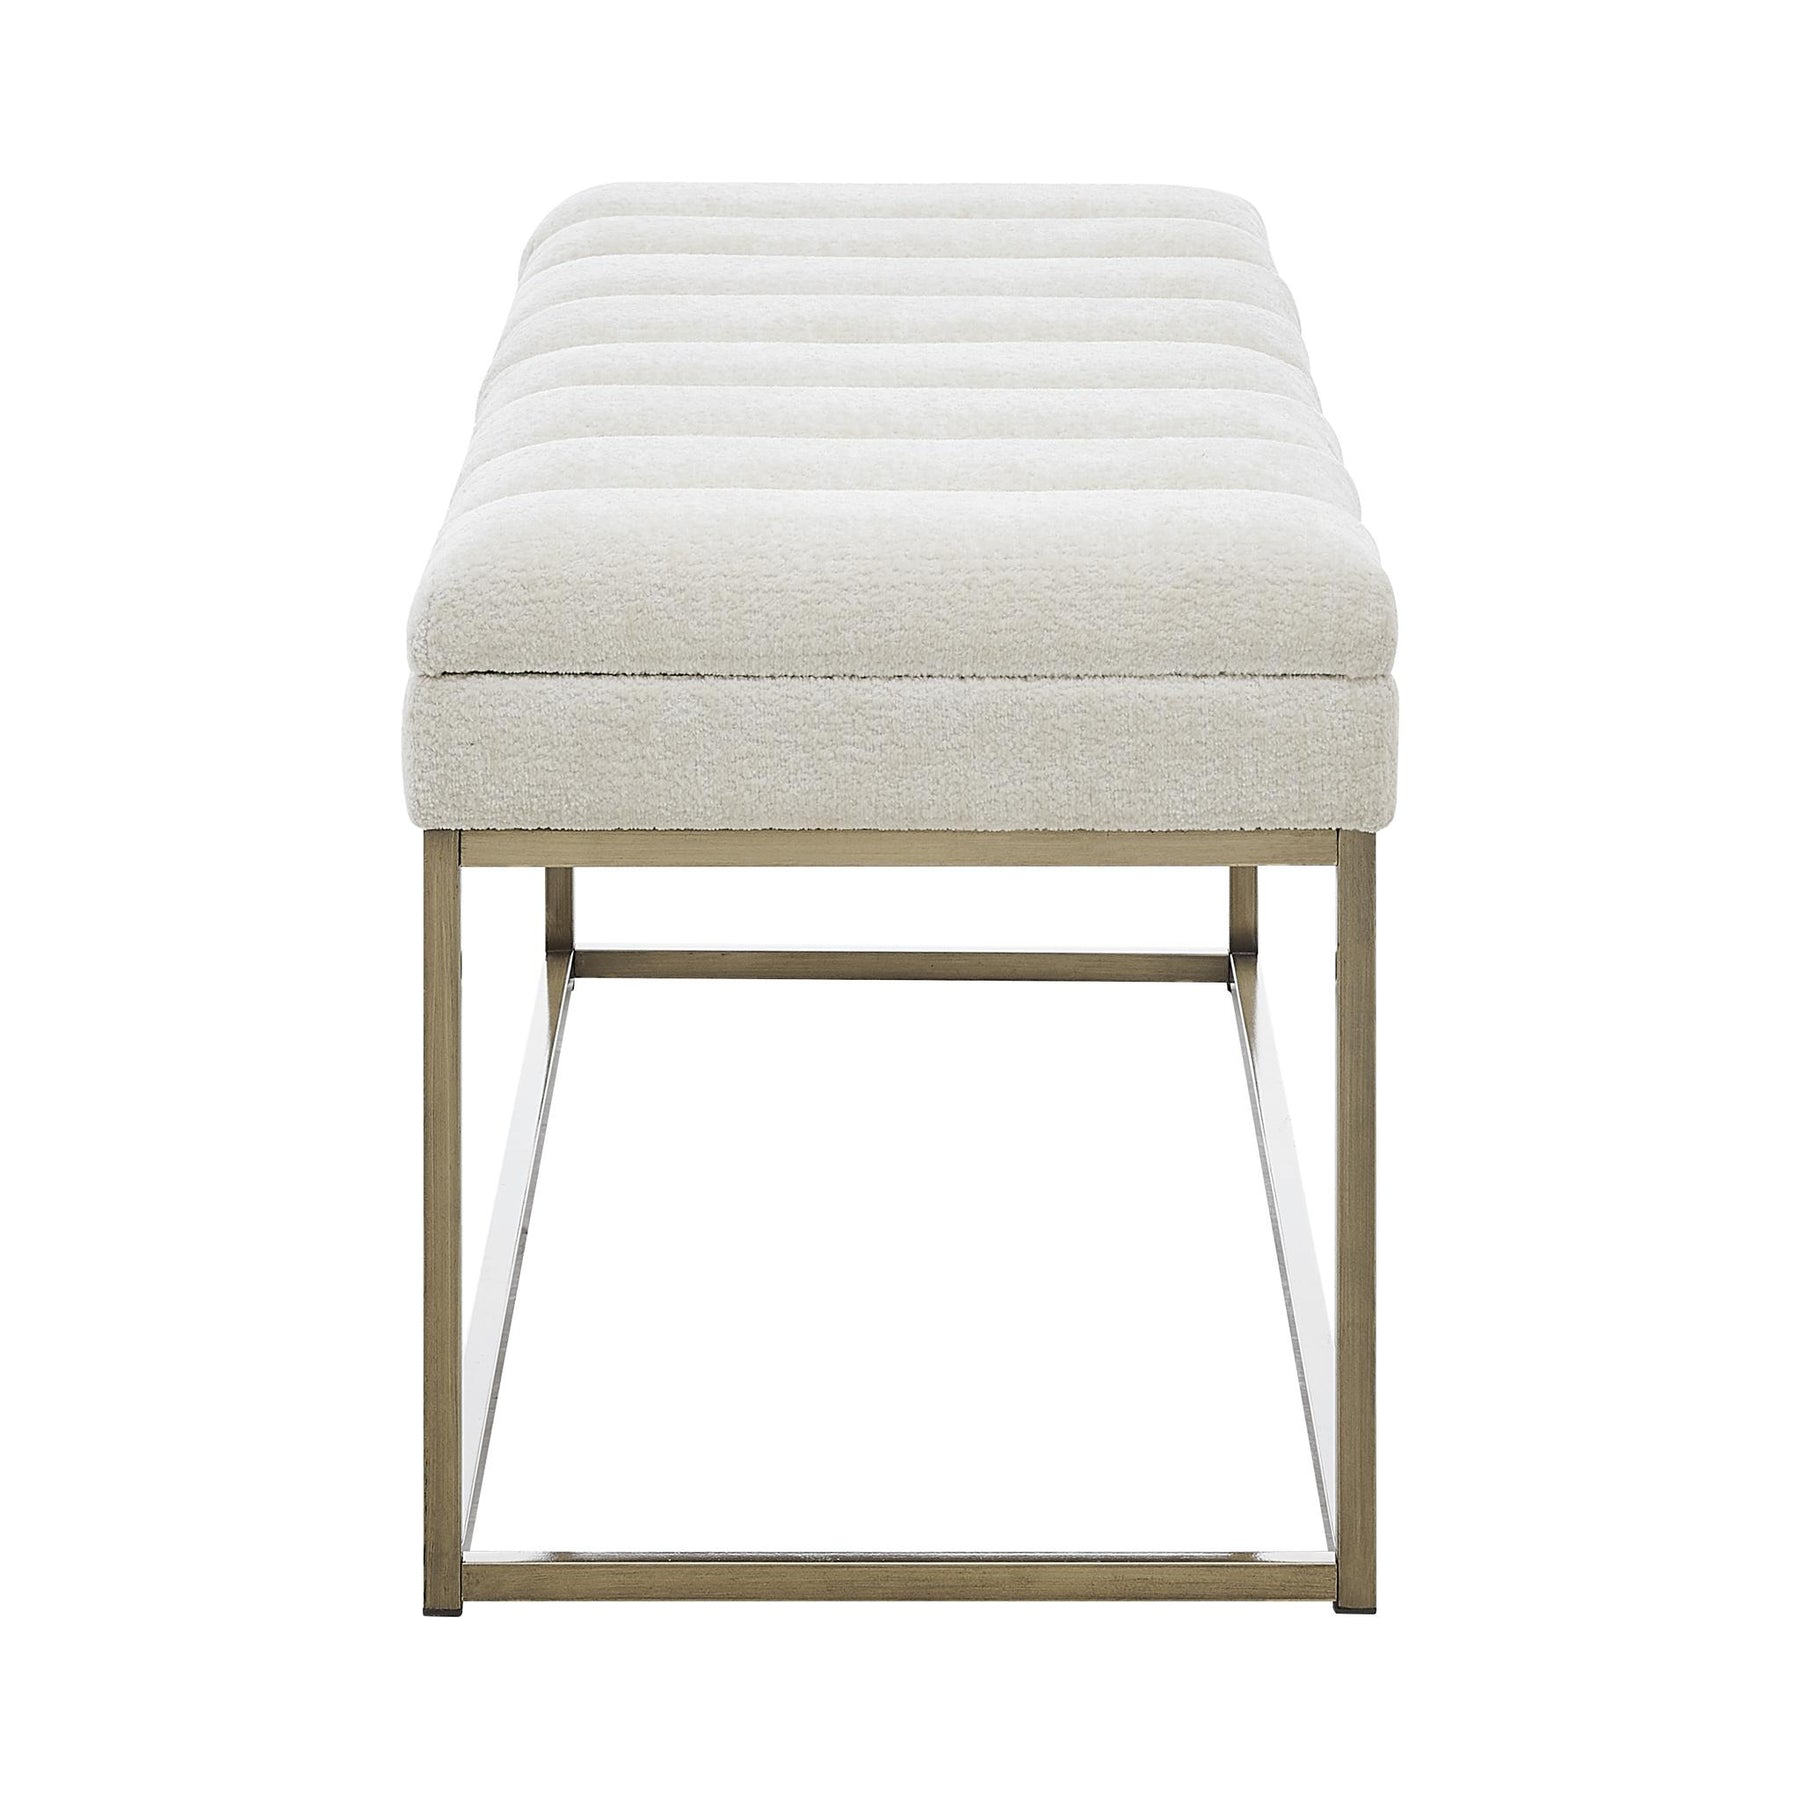 Darius KD Fabric Bench by New Pacific Direct - 1600080